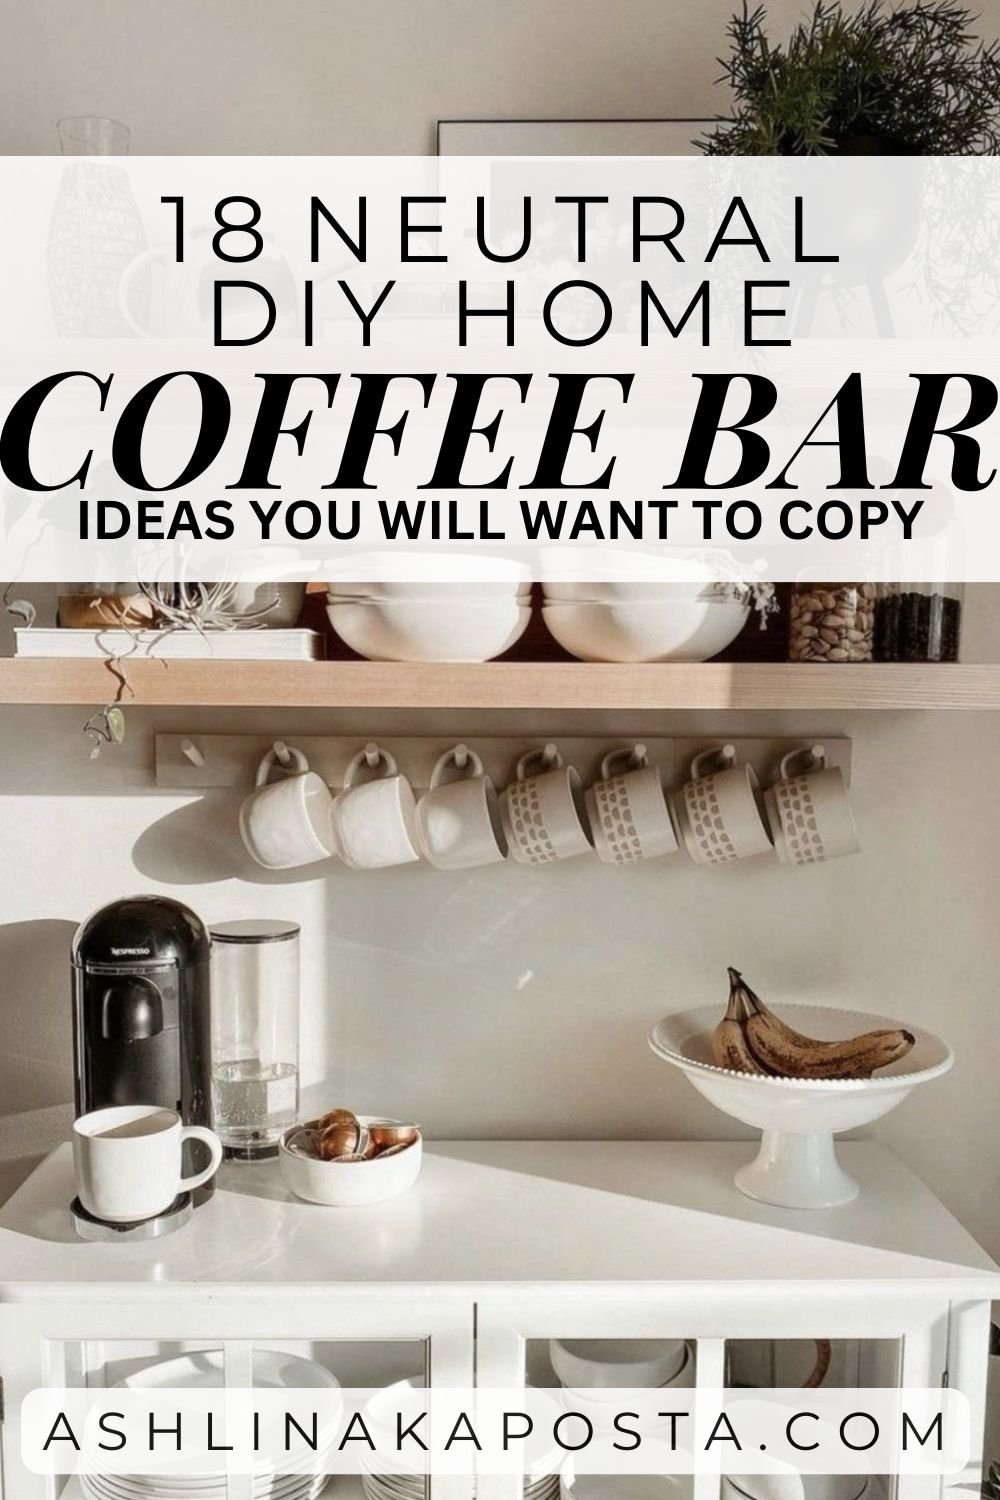 COFFEE BAR STYLING TIPS – Making Home Matter